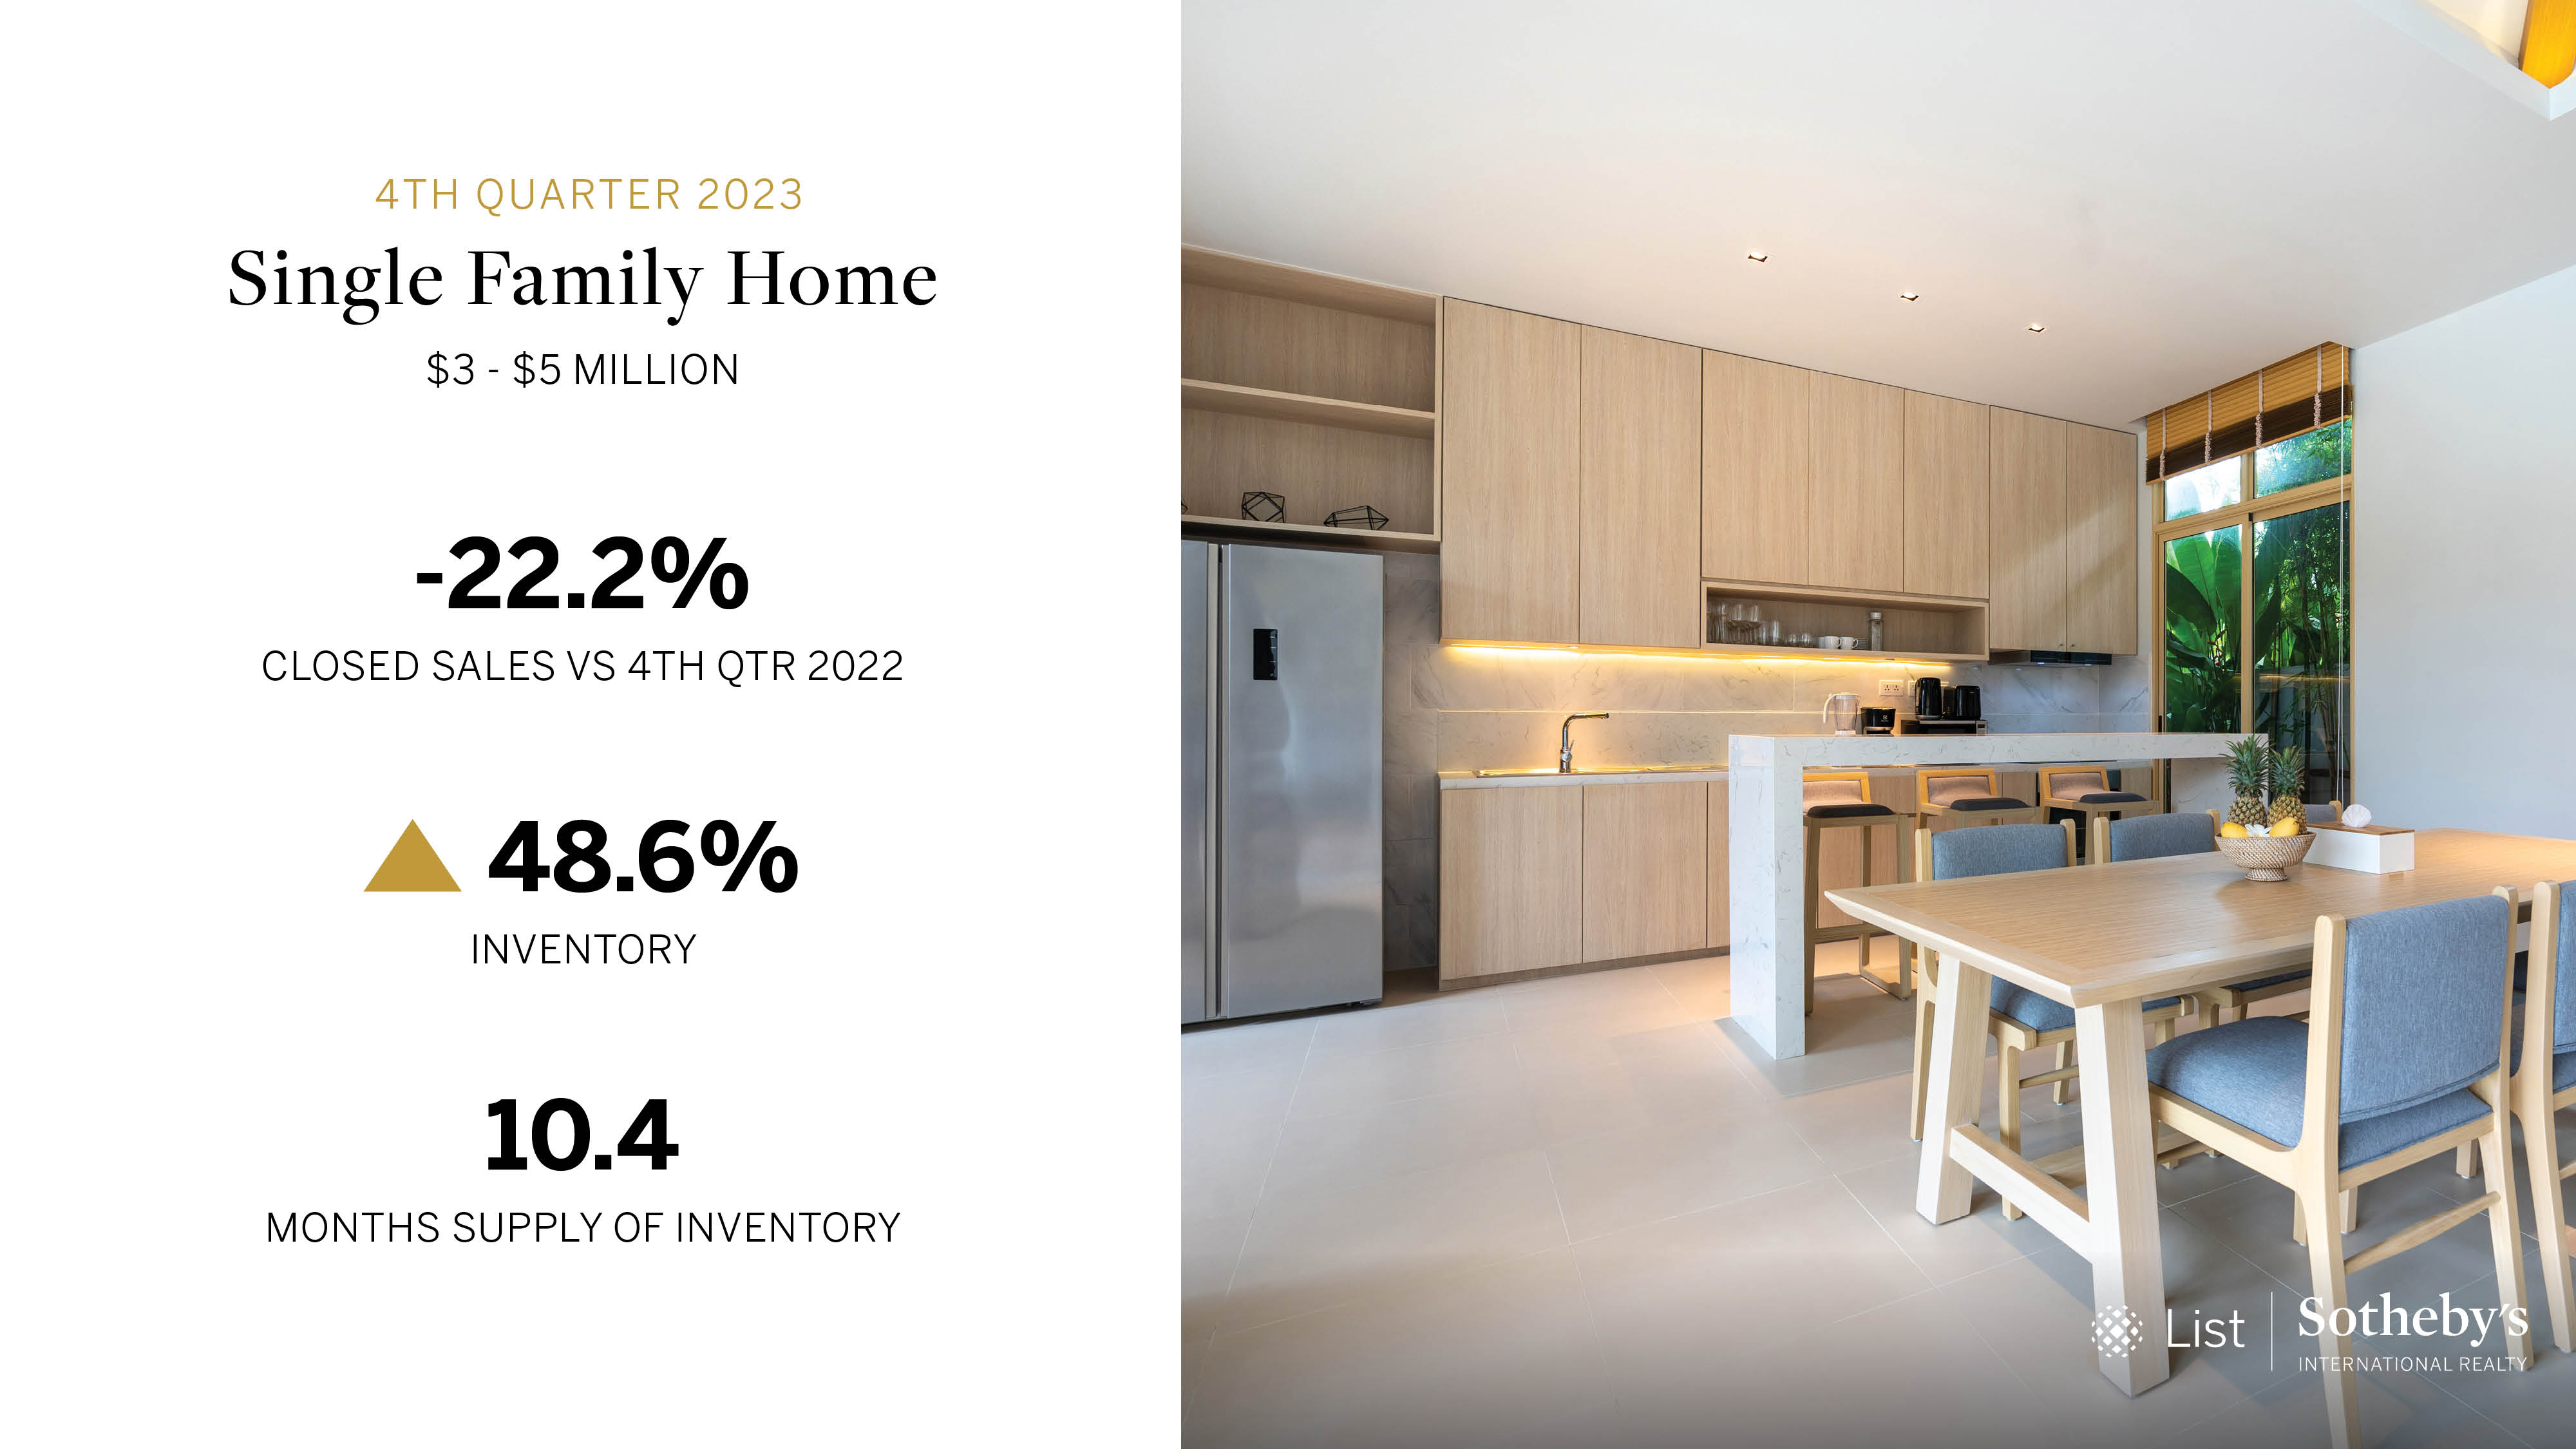 A kitchen on the right side of the image and luxury market stats on the left side